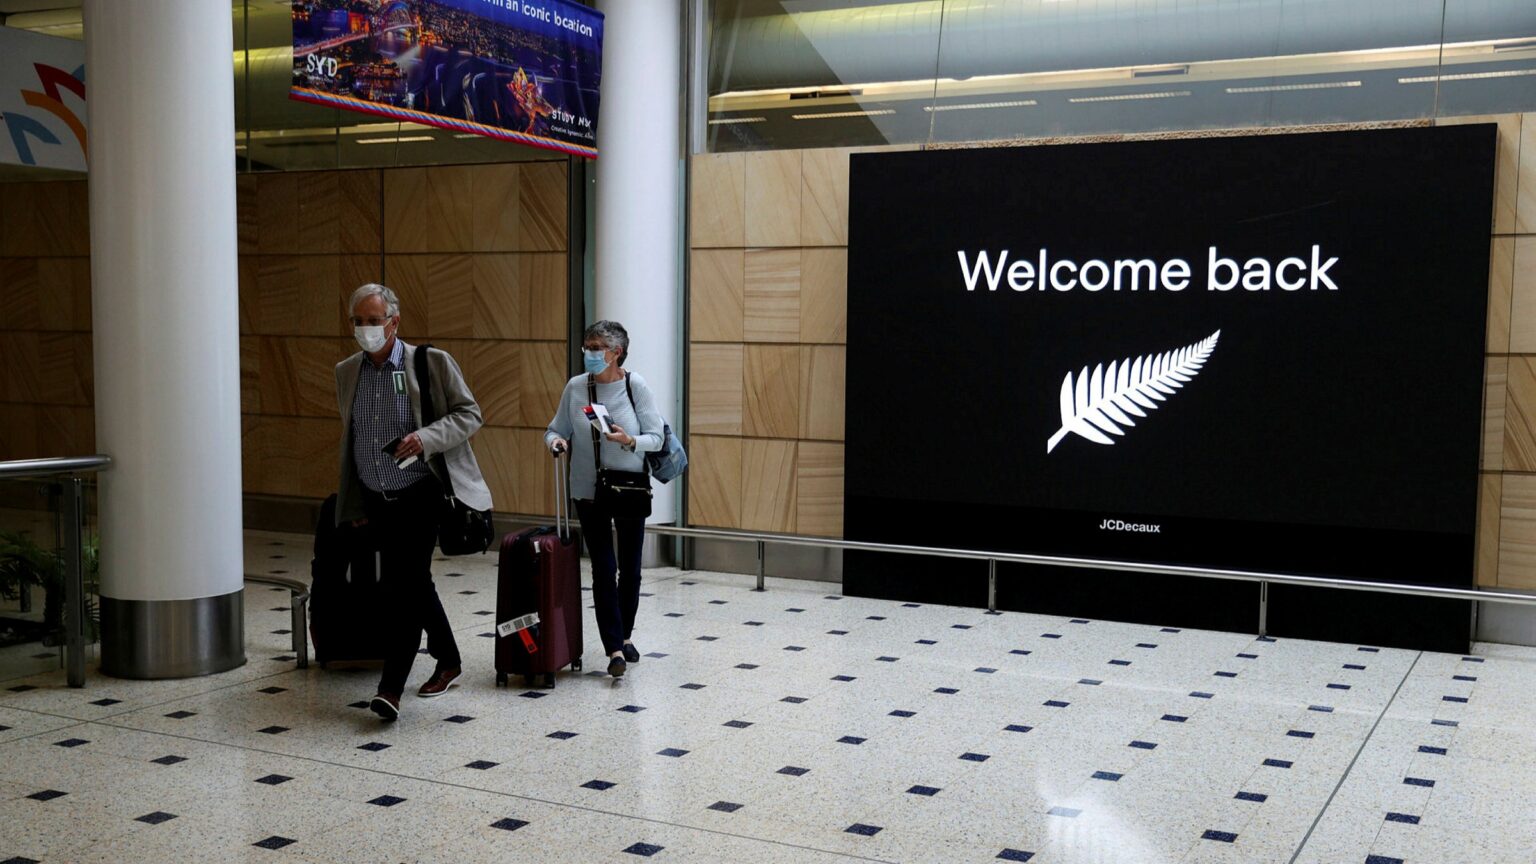 New Zealand fully reopens its border after the Pandemic